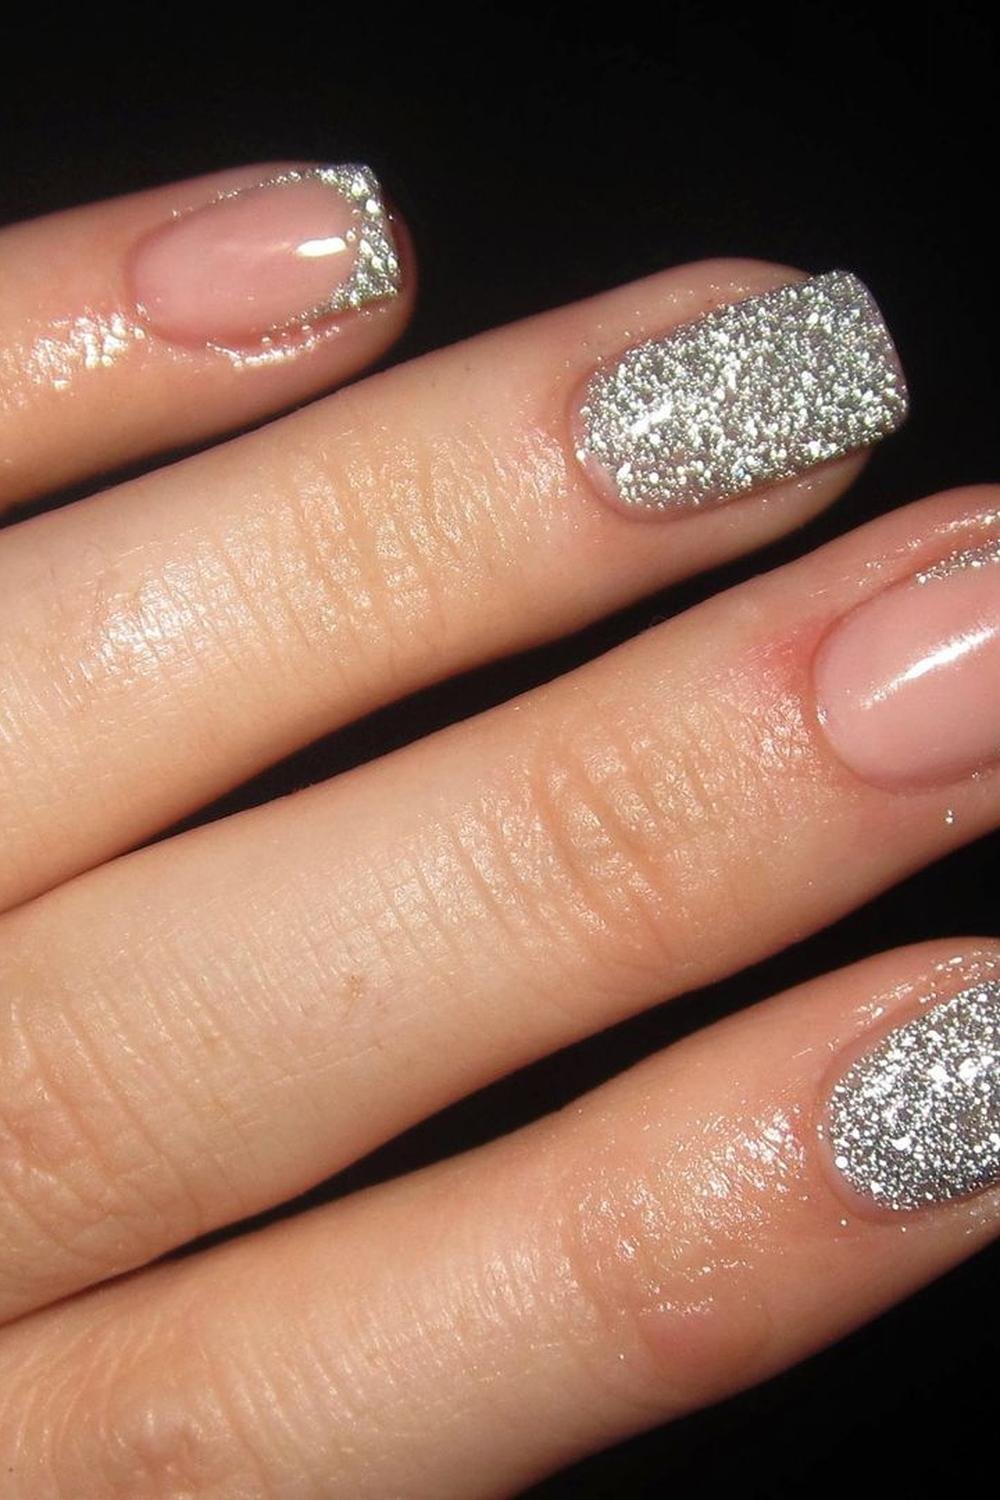 12 - Picture of Silver Glitter Nails